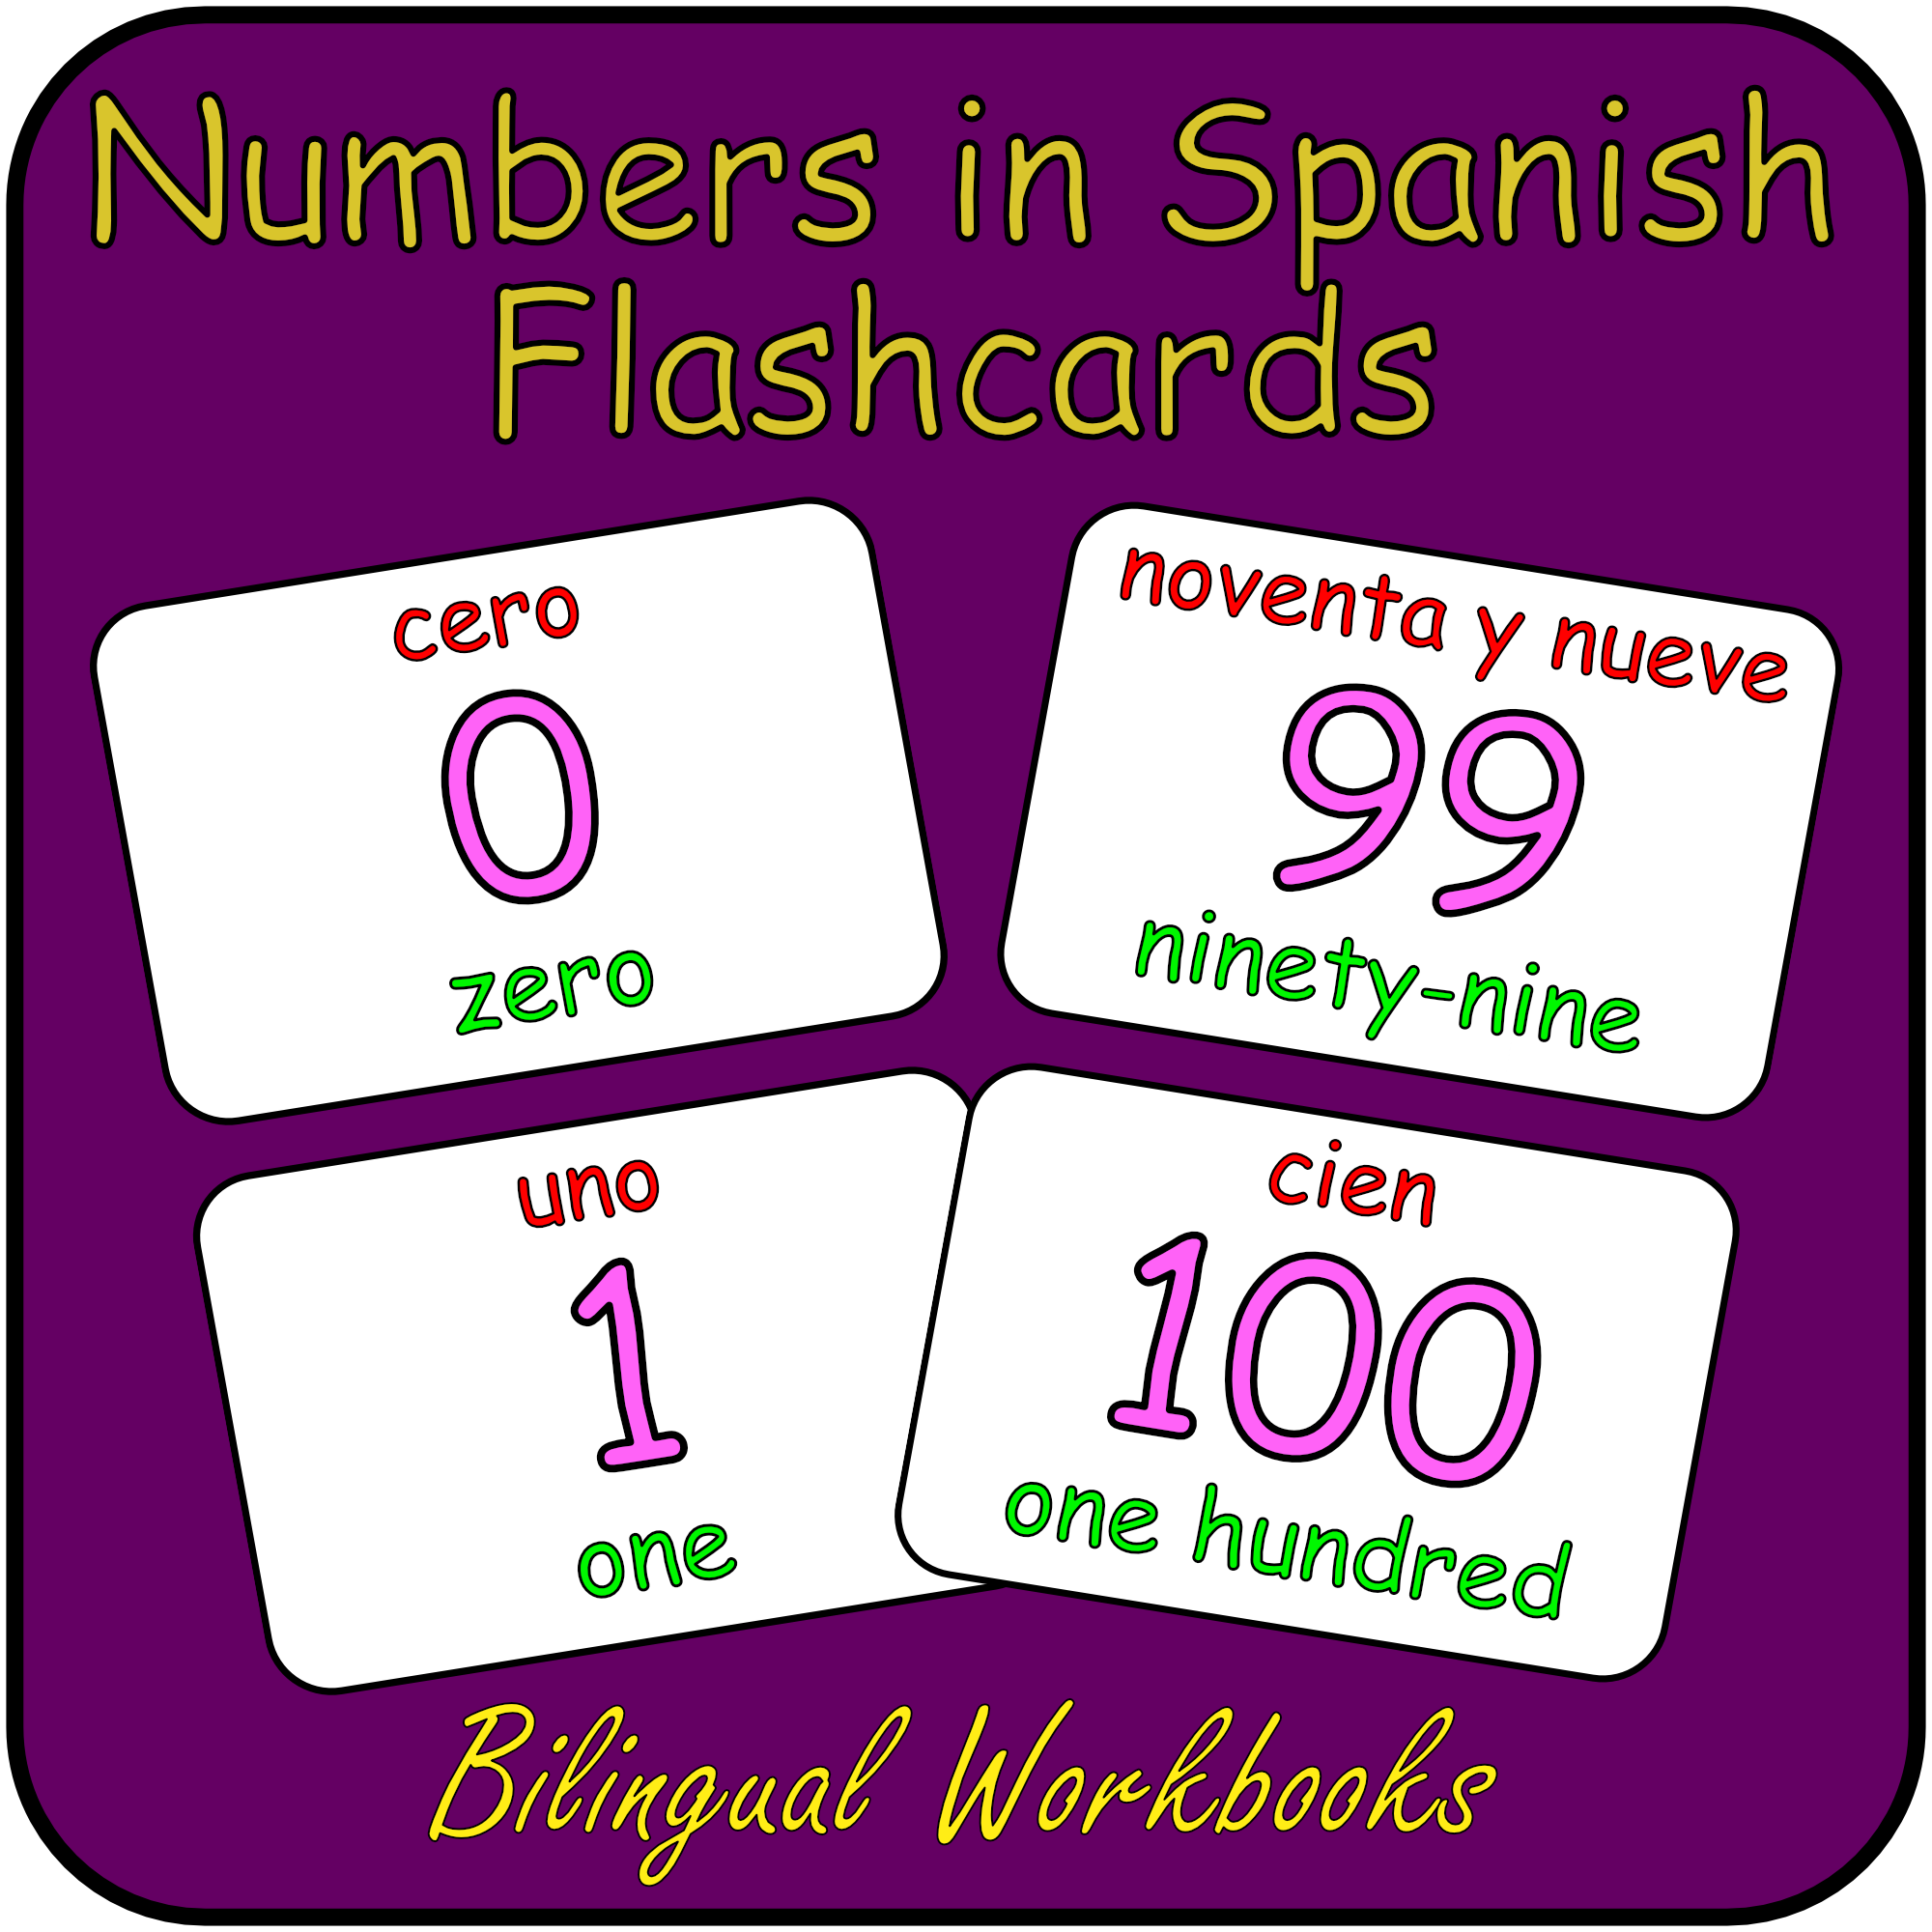 NUMBERS 0-100 - Spanish Flash Cards - Vocabulary Study flashcards with English and Spanish - Learn or Teach Spanish